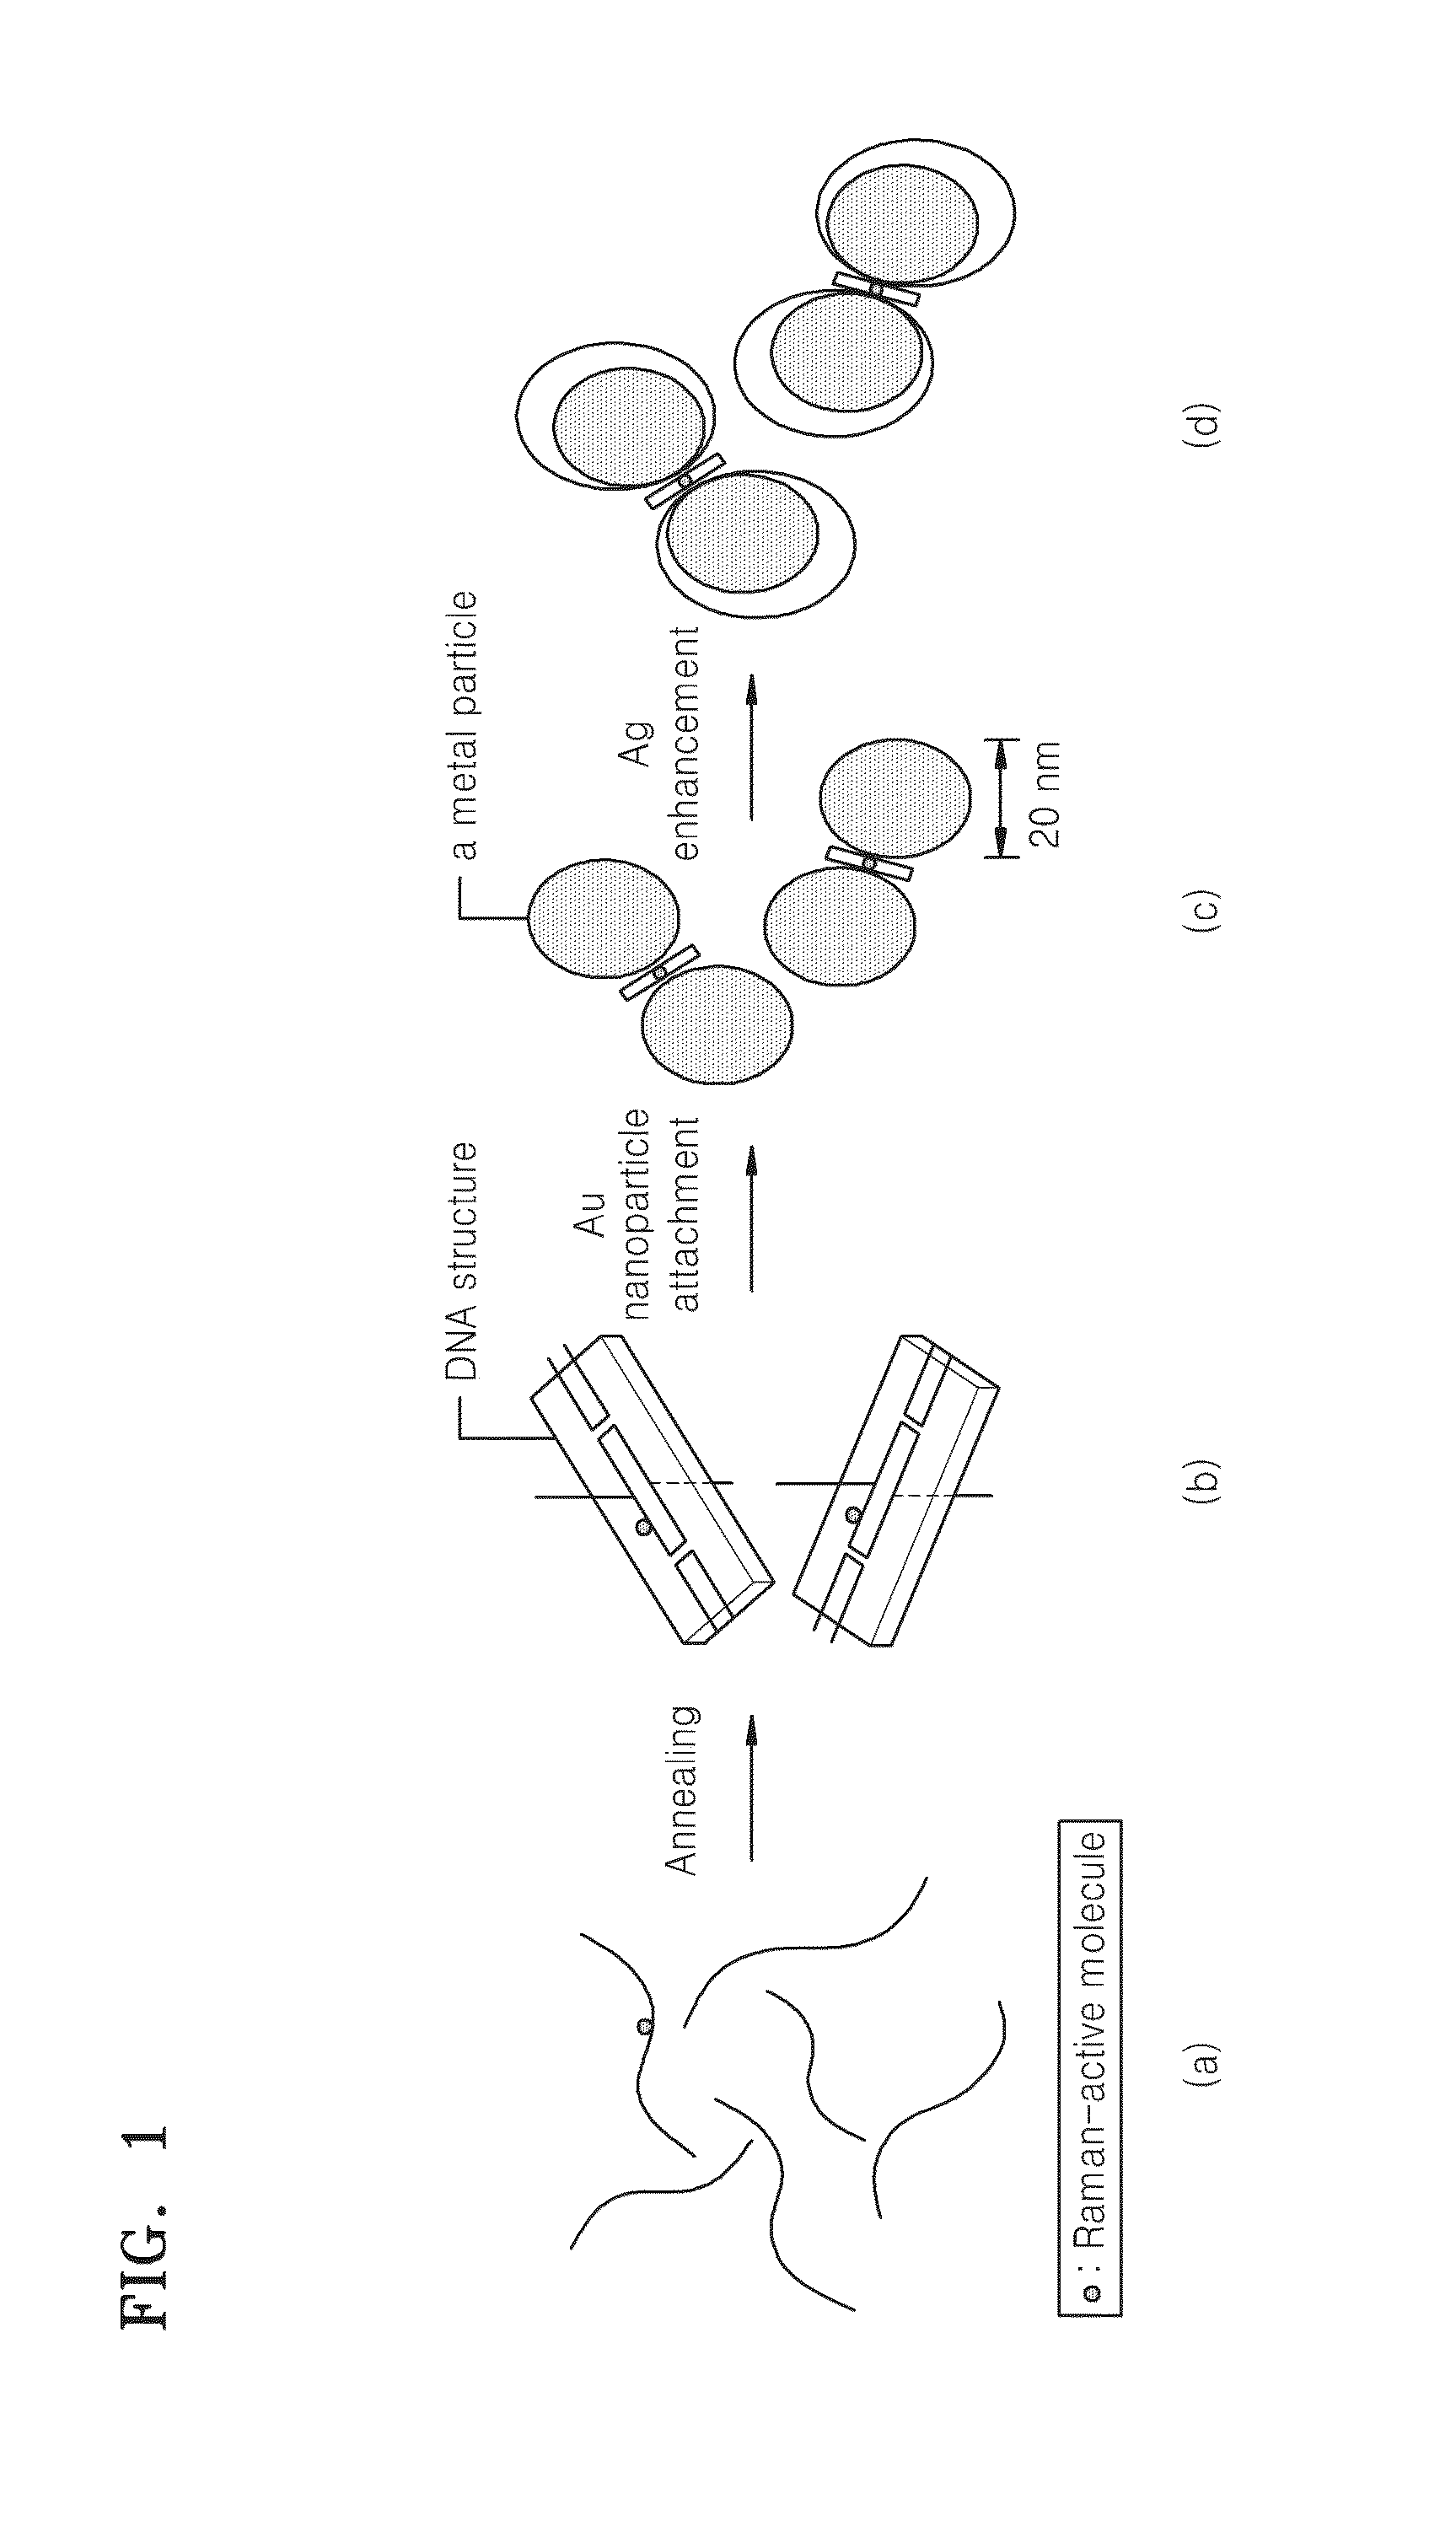 Interparticle spacing material including nucleic acid structures and use thereof